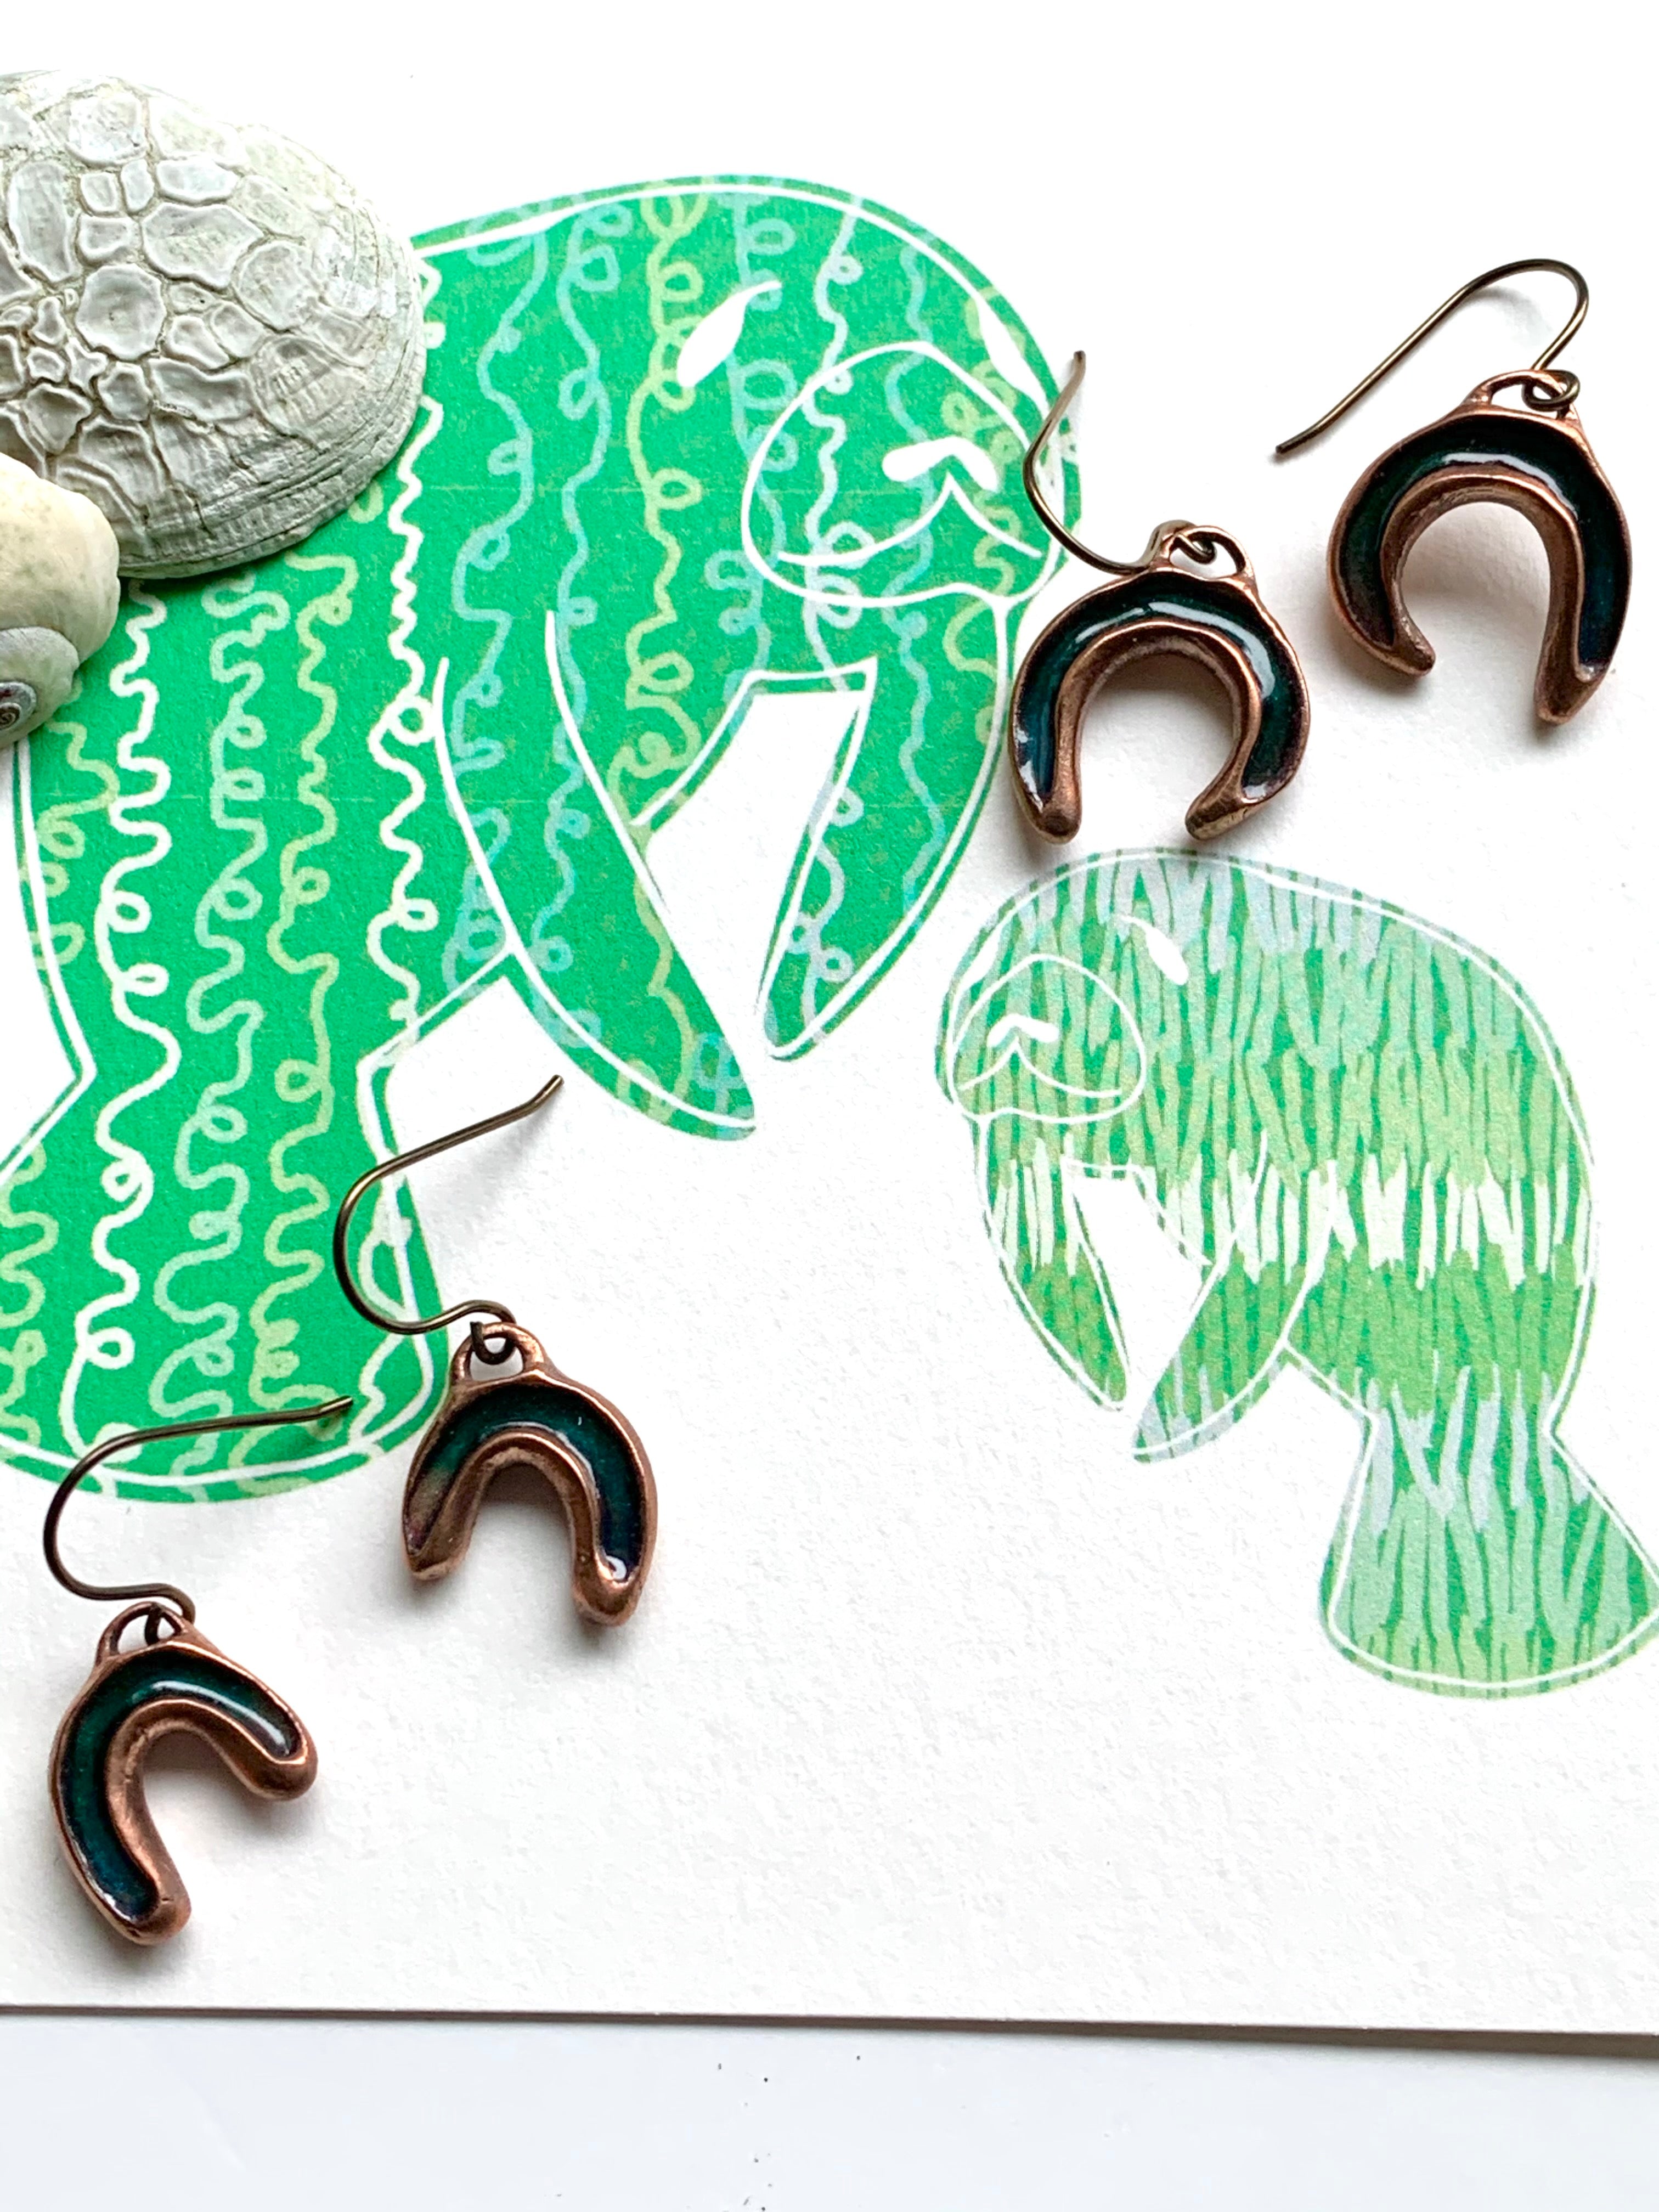 Manatees with copper and enamel art jewelry earrings